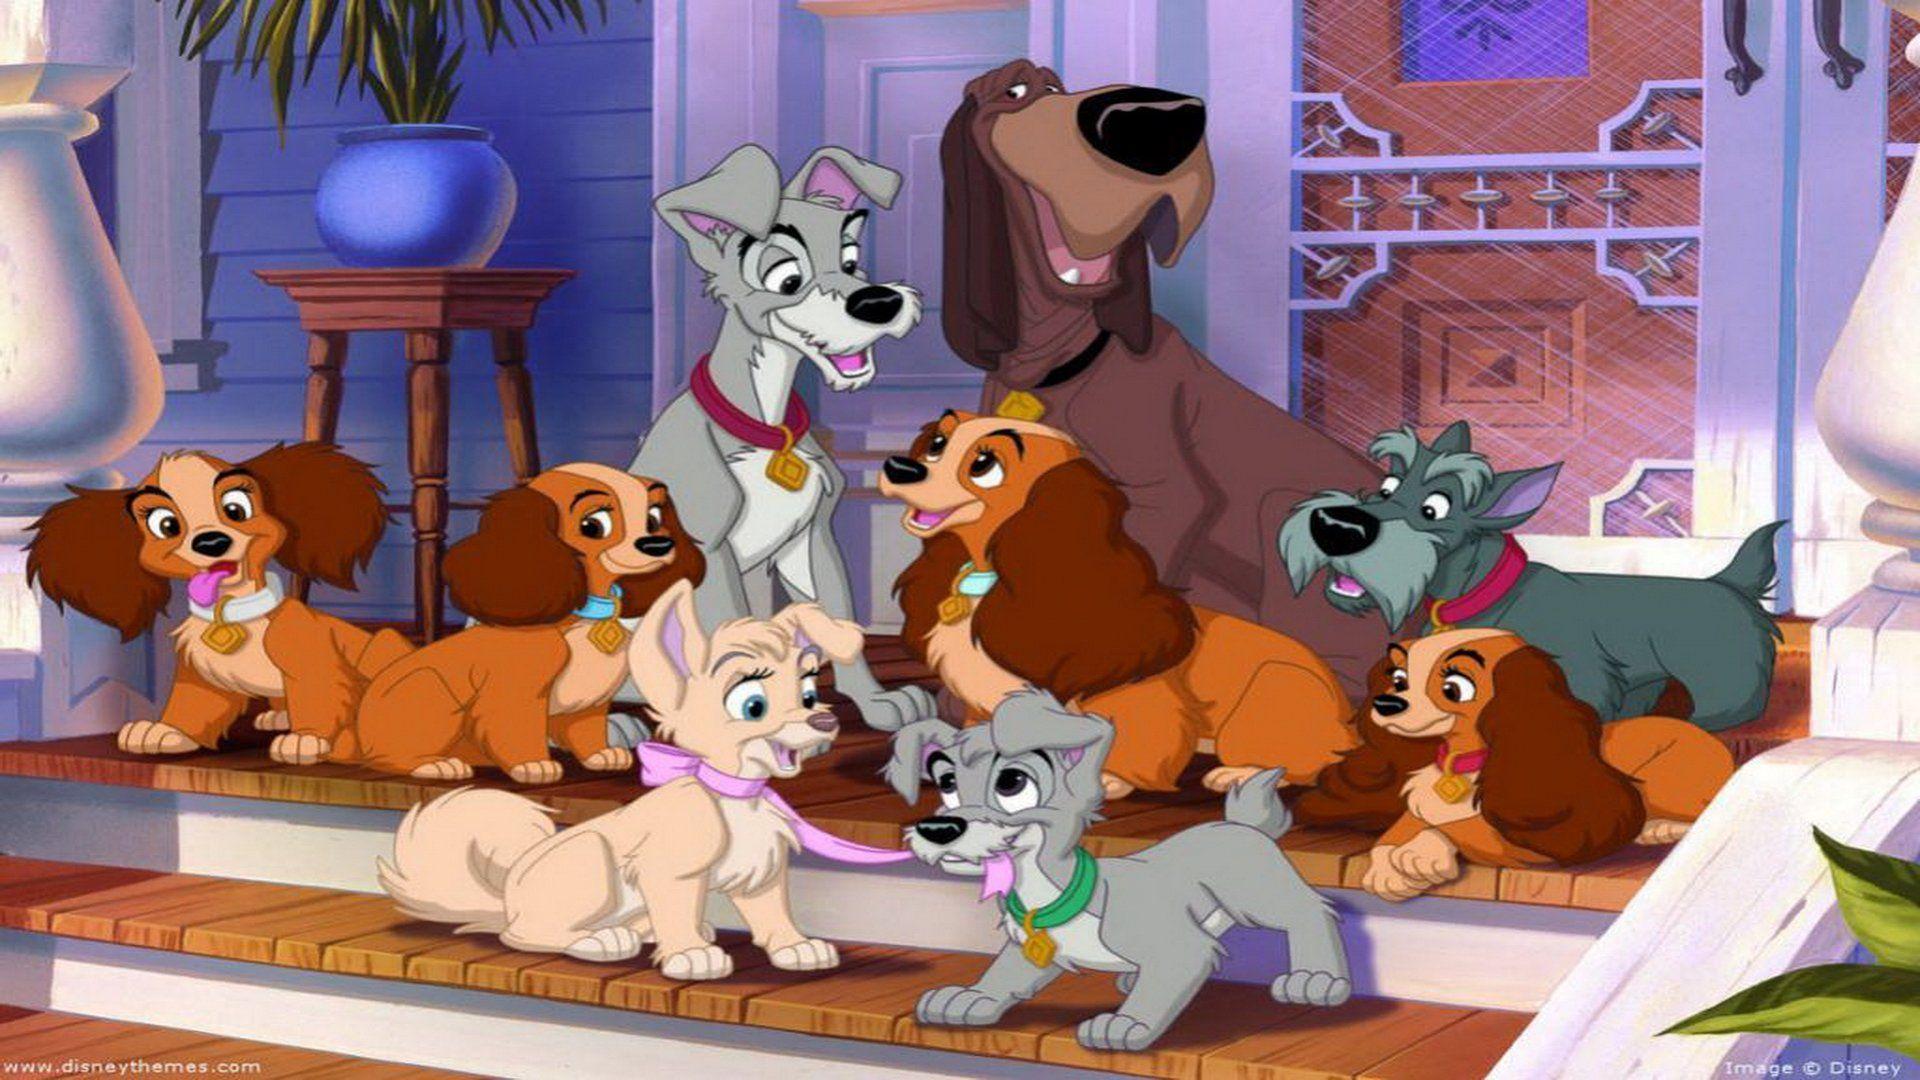 Download Lady And The Tramp 1955 wallpapers for mobile phone free Lady  And The Tramp 1955 HD pictures